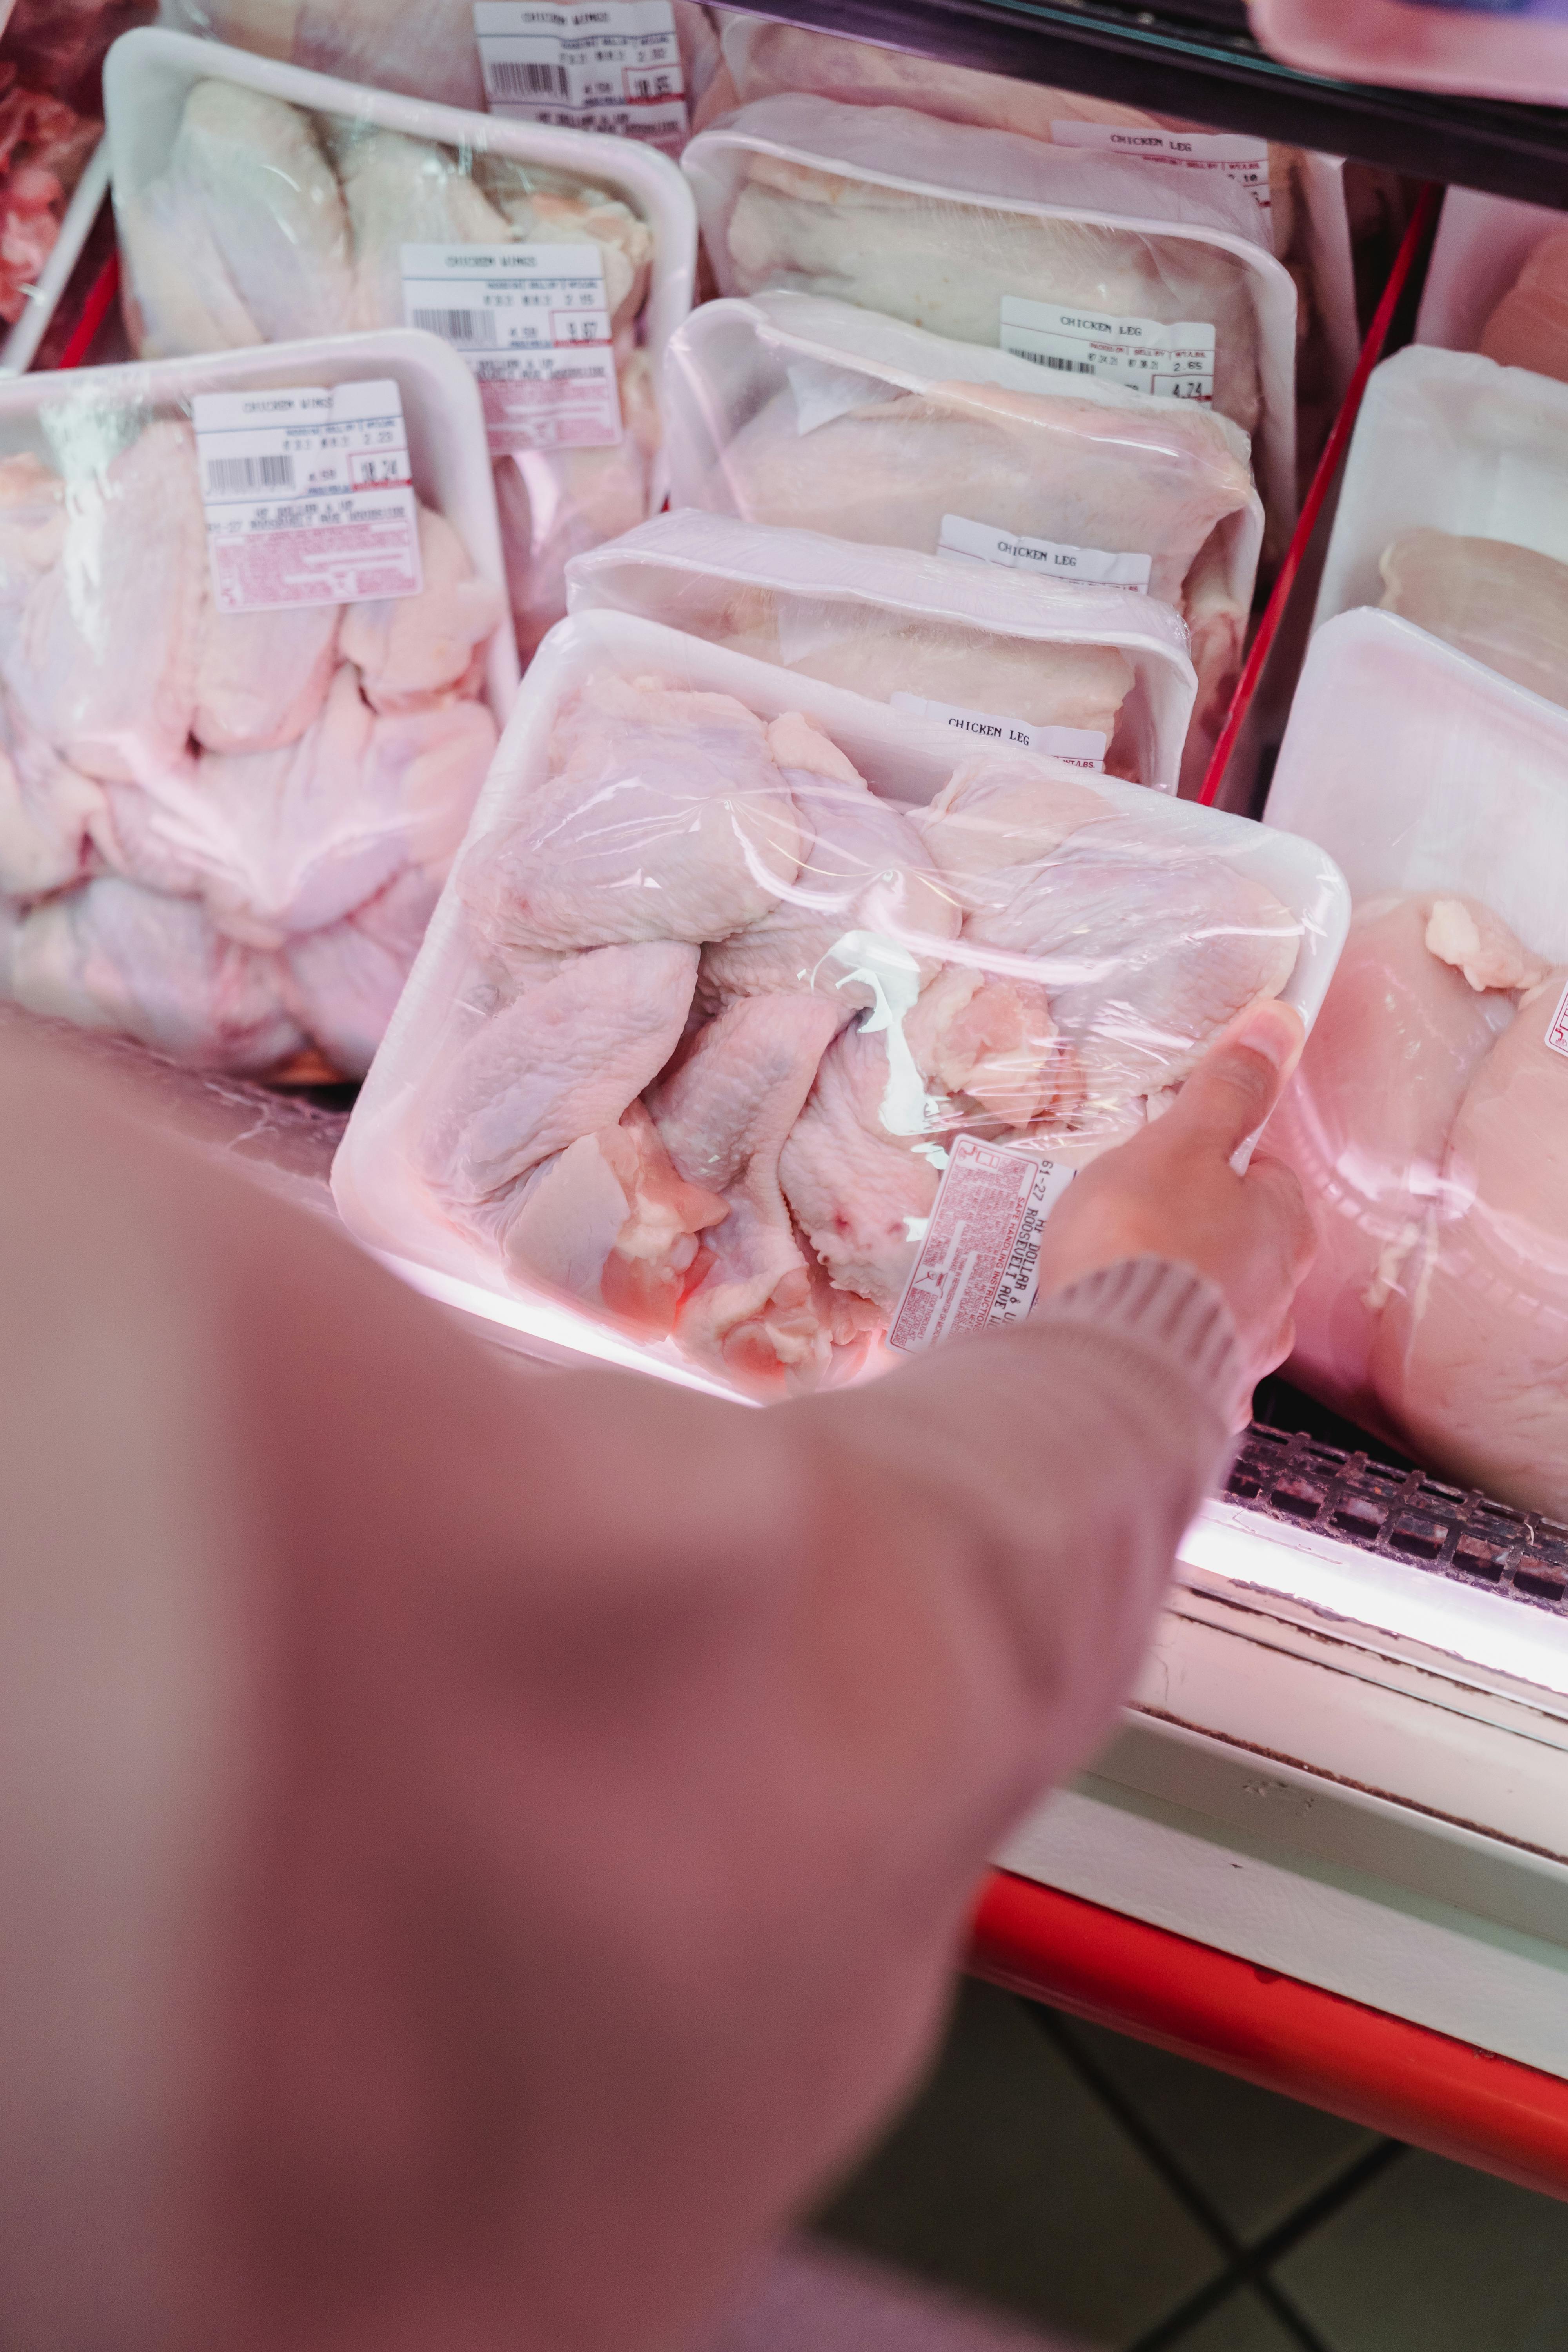 Picking meat at a store | Source: Pexels